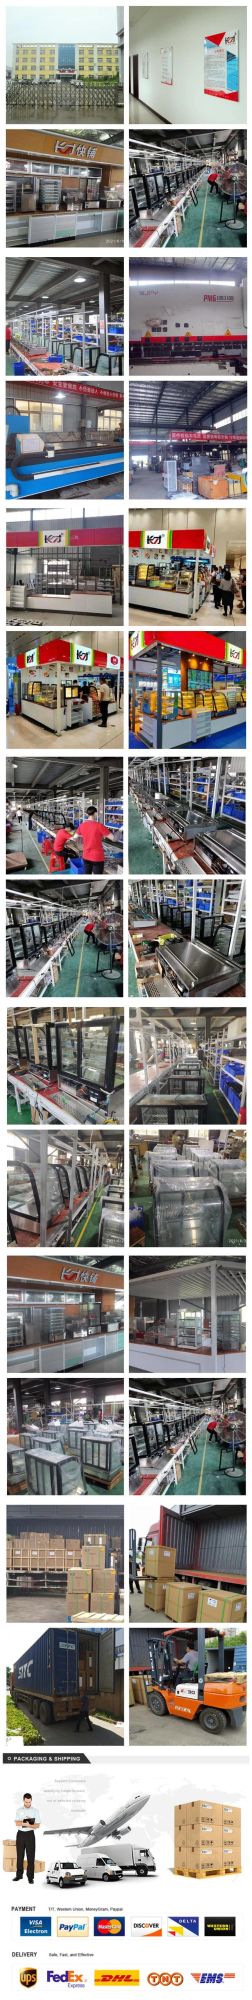 Dzcf-4f8p Electric Food Warming Showcase for Sale Glass Display Cabinets Hot Fast Food Warmer Showcase for Chicken